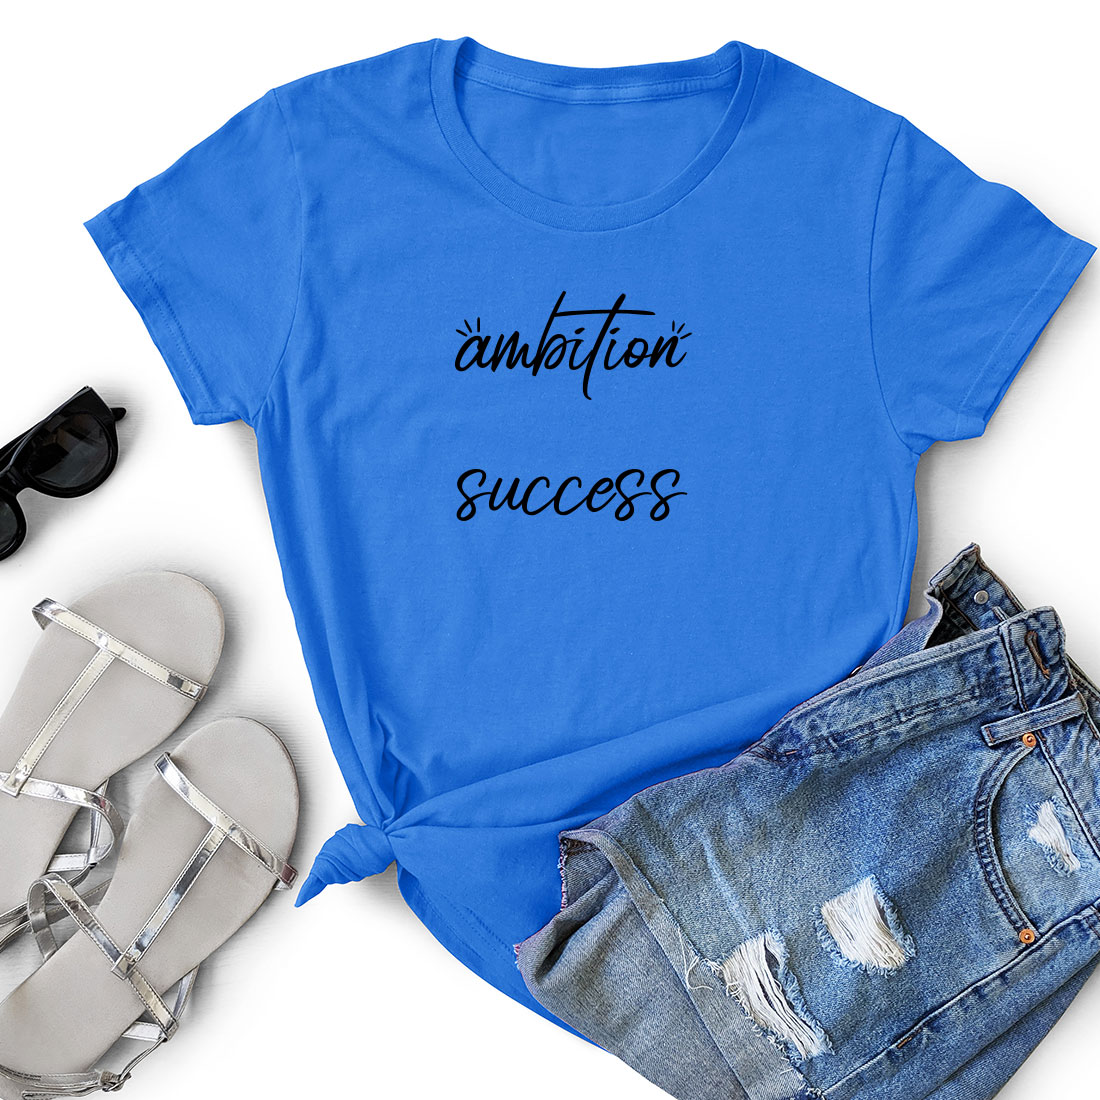 T - shirt that says emotion success next to a pair of shorts.